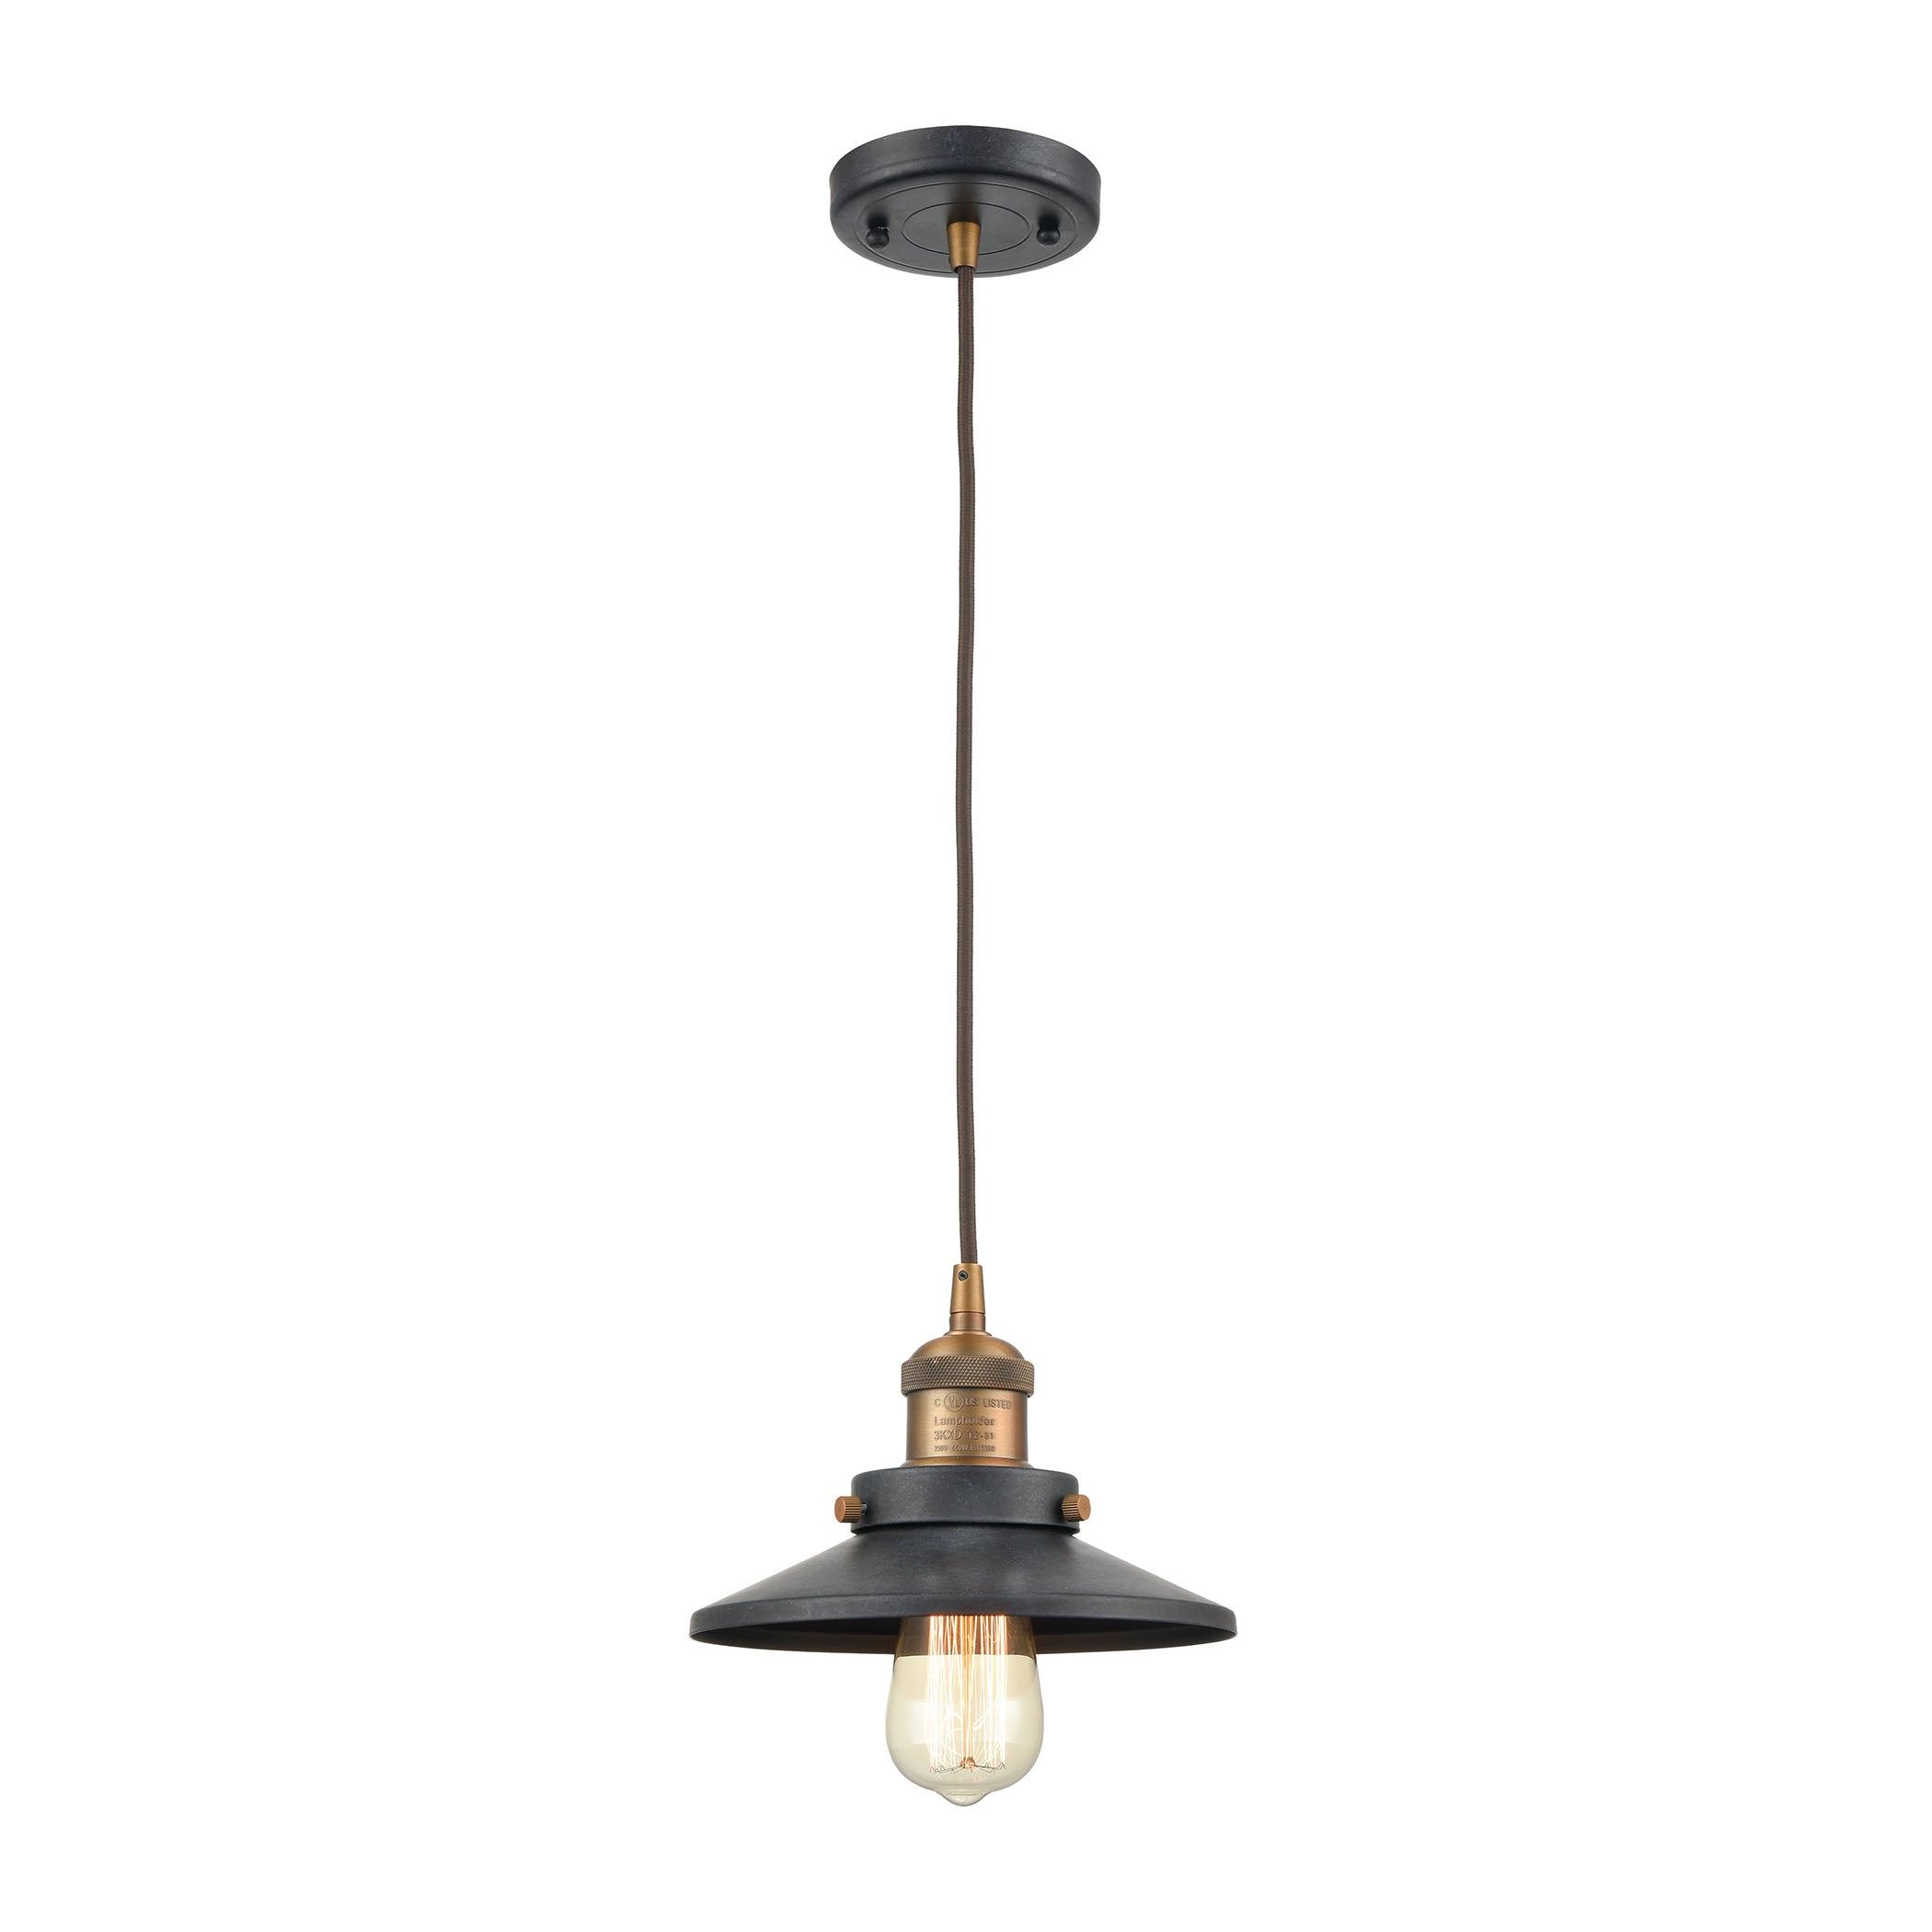 ELK Lighting 67184/1 English Pub 1-Light Mini Pendant in Antique Brass and Tarnished Graphite with Metal Shade